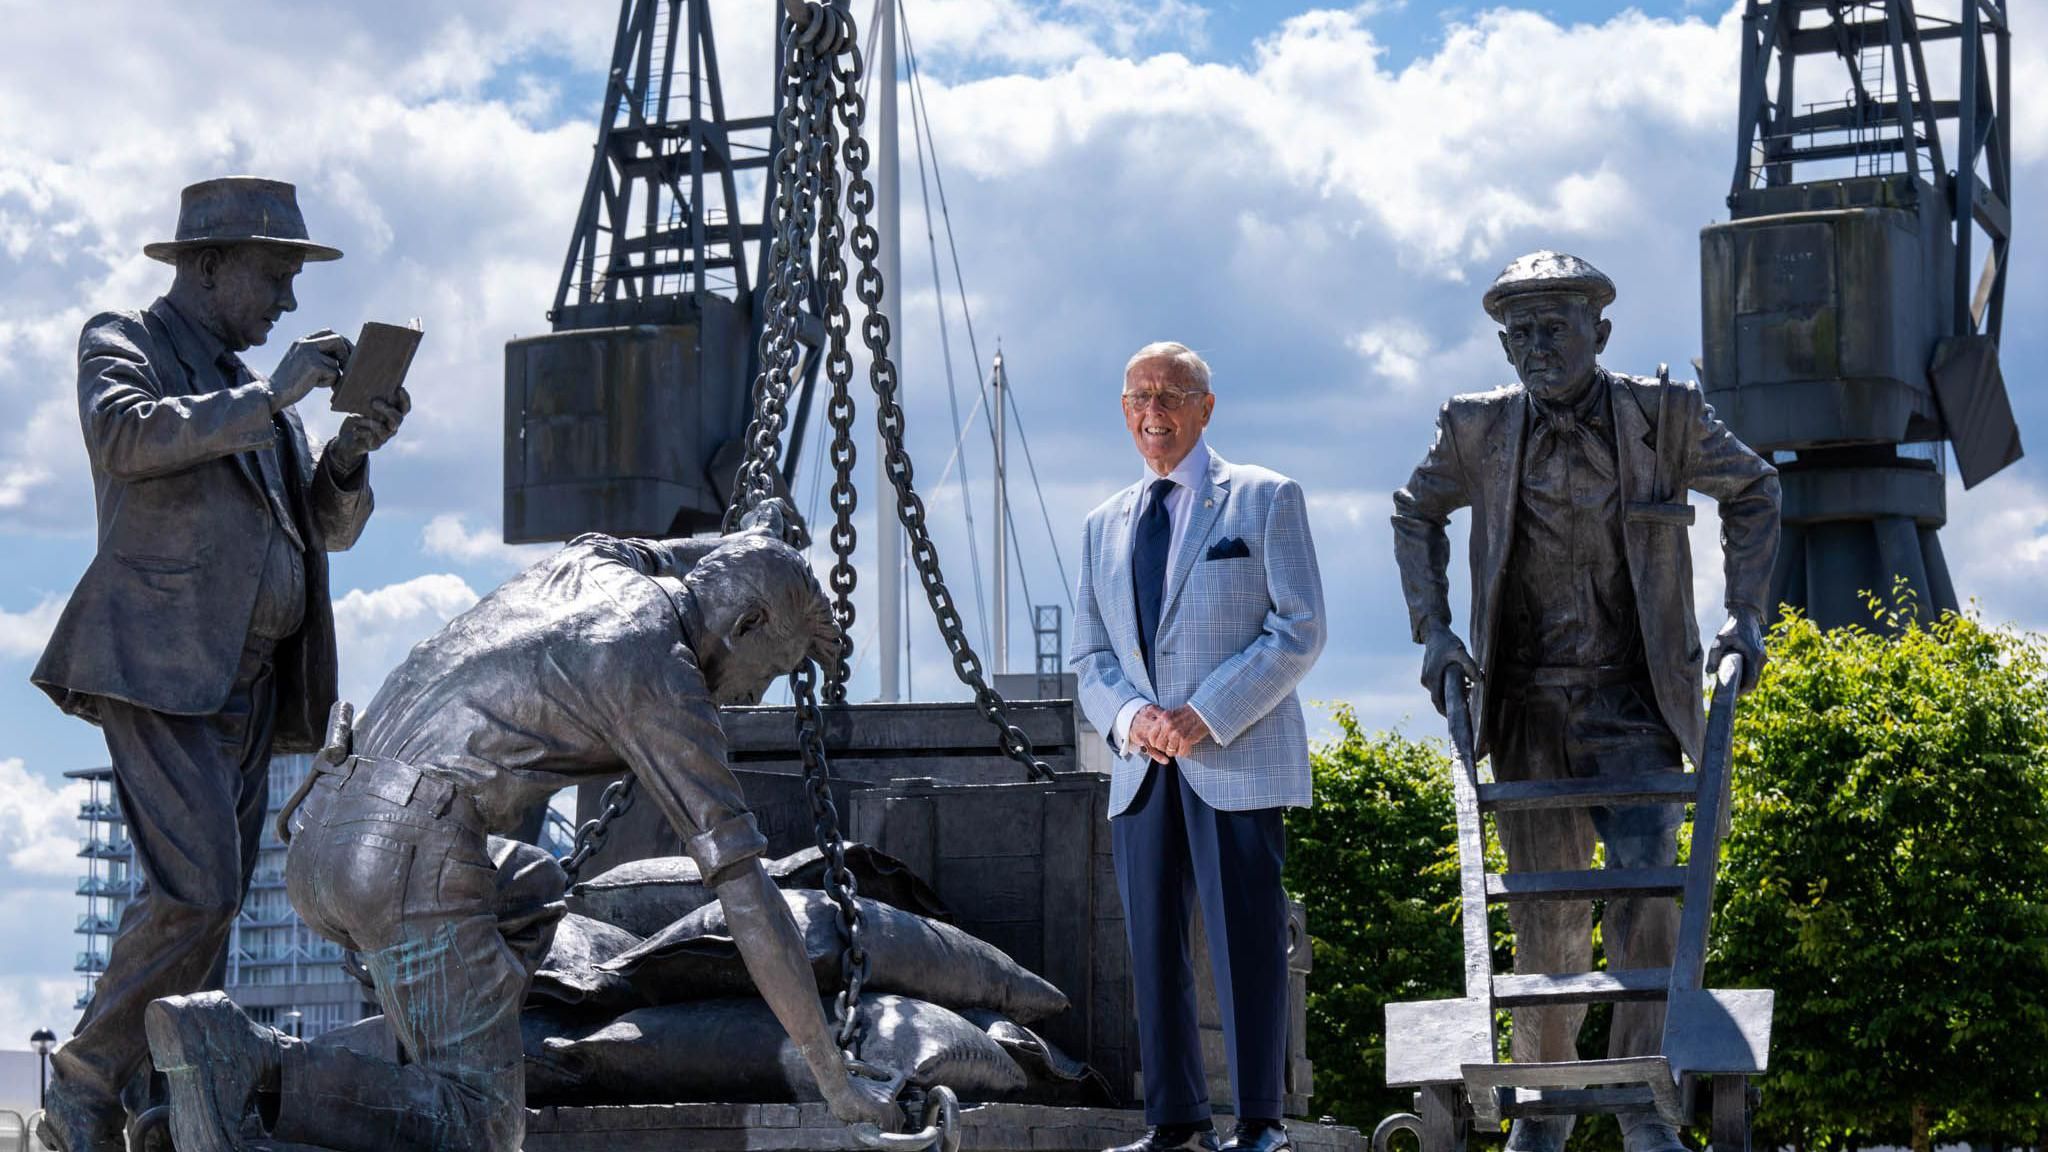 Johnny Ringwood, wearing a light blue suit jacket with navy blue trousers and tie, standing with the monument of three dockworkers at the Royal Docks in London